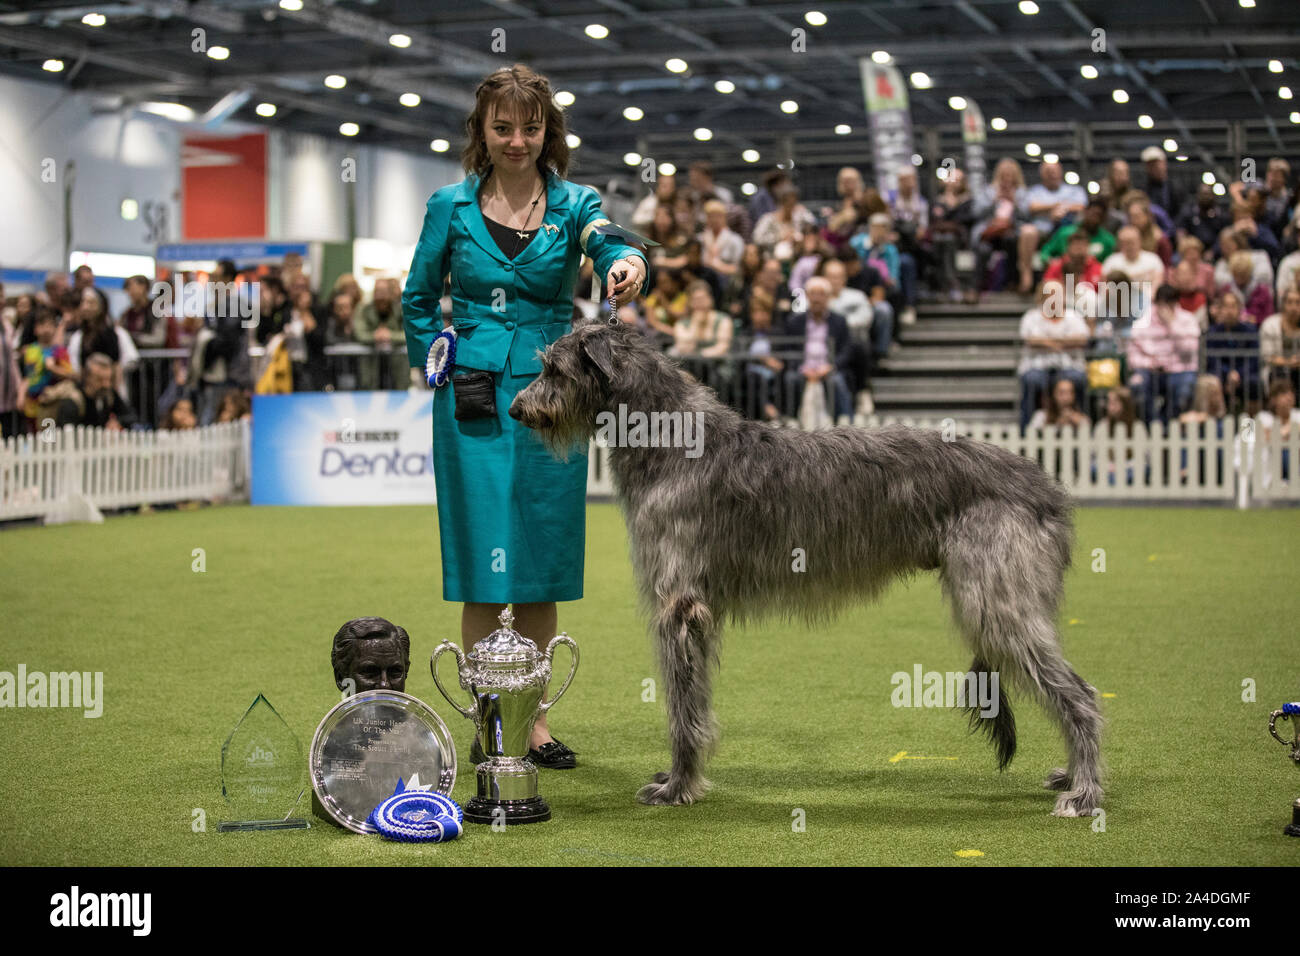 The Kennel Club Discovery Dogs exhibition at Excel London, UK Picture shows Abigail Levene winner in the final judging of the UK Junior Handler of the Stock Photo